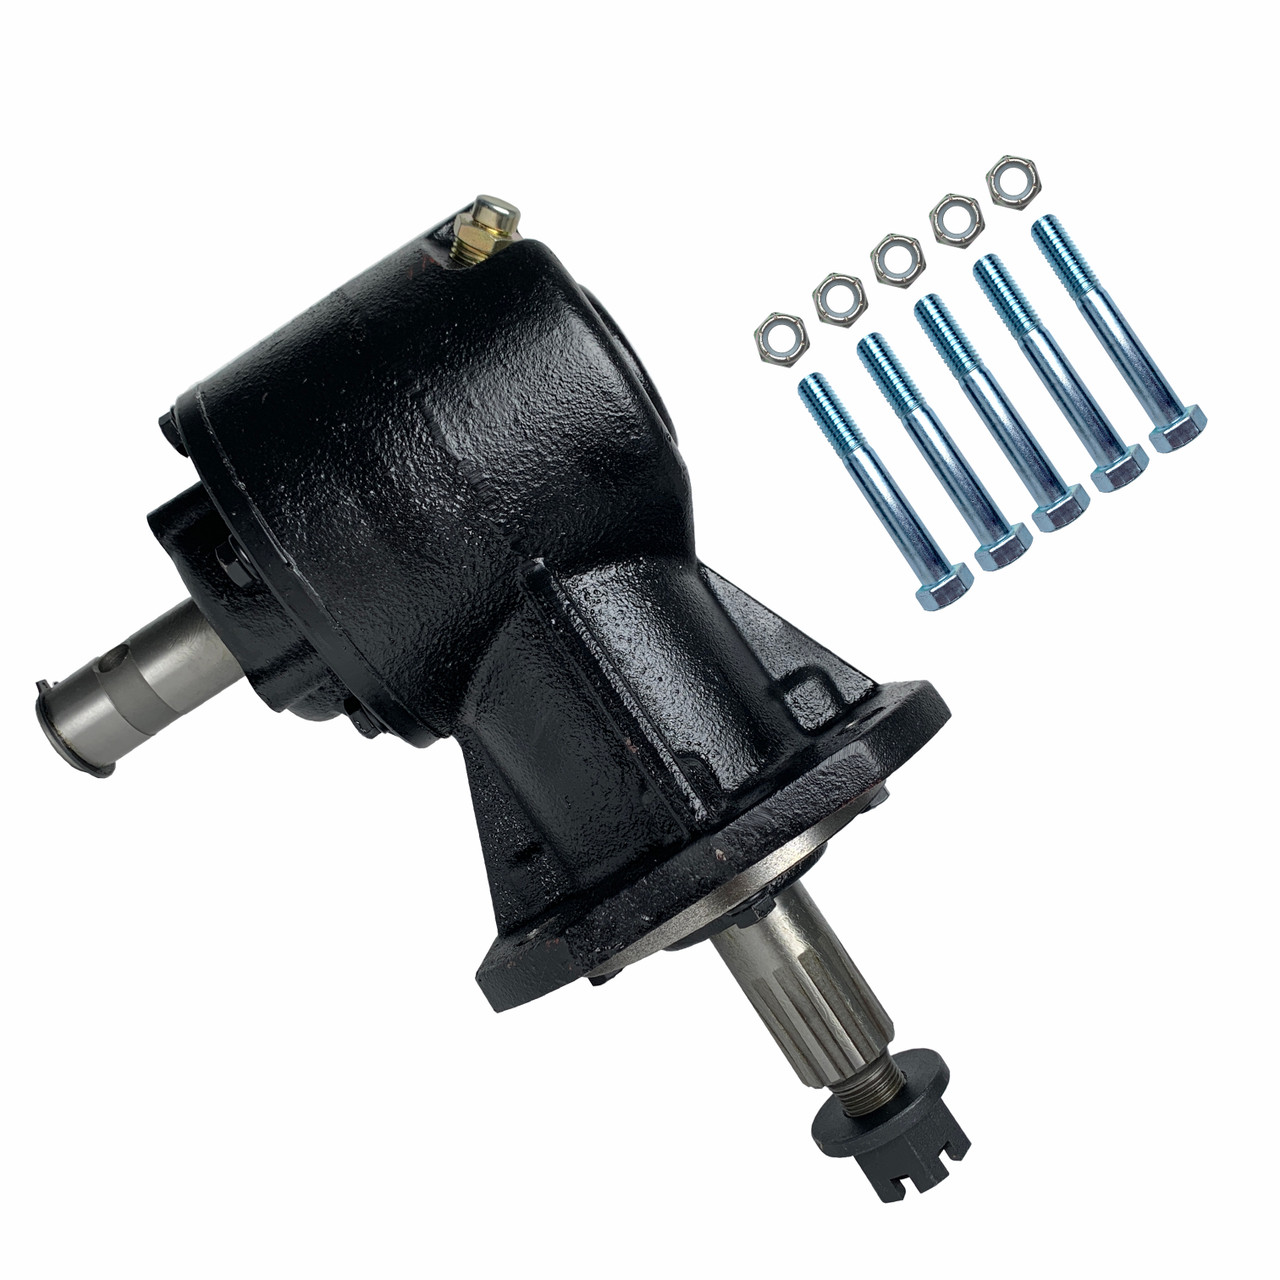 Shear Bolt Gearbox 35-45HP - Rotary Replacement Kit for Omni Gear RC30 with 5 Extra Shear Bolts, Lubricant Not Included